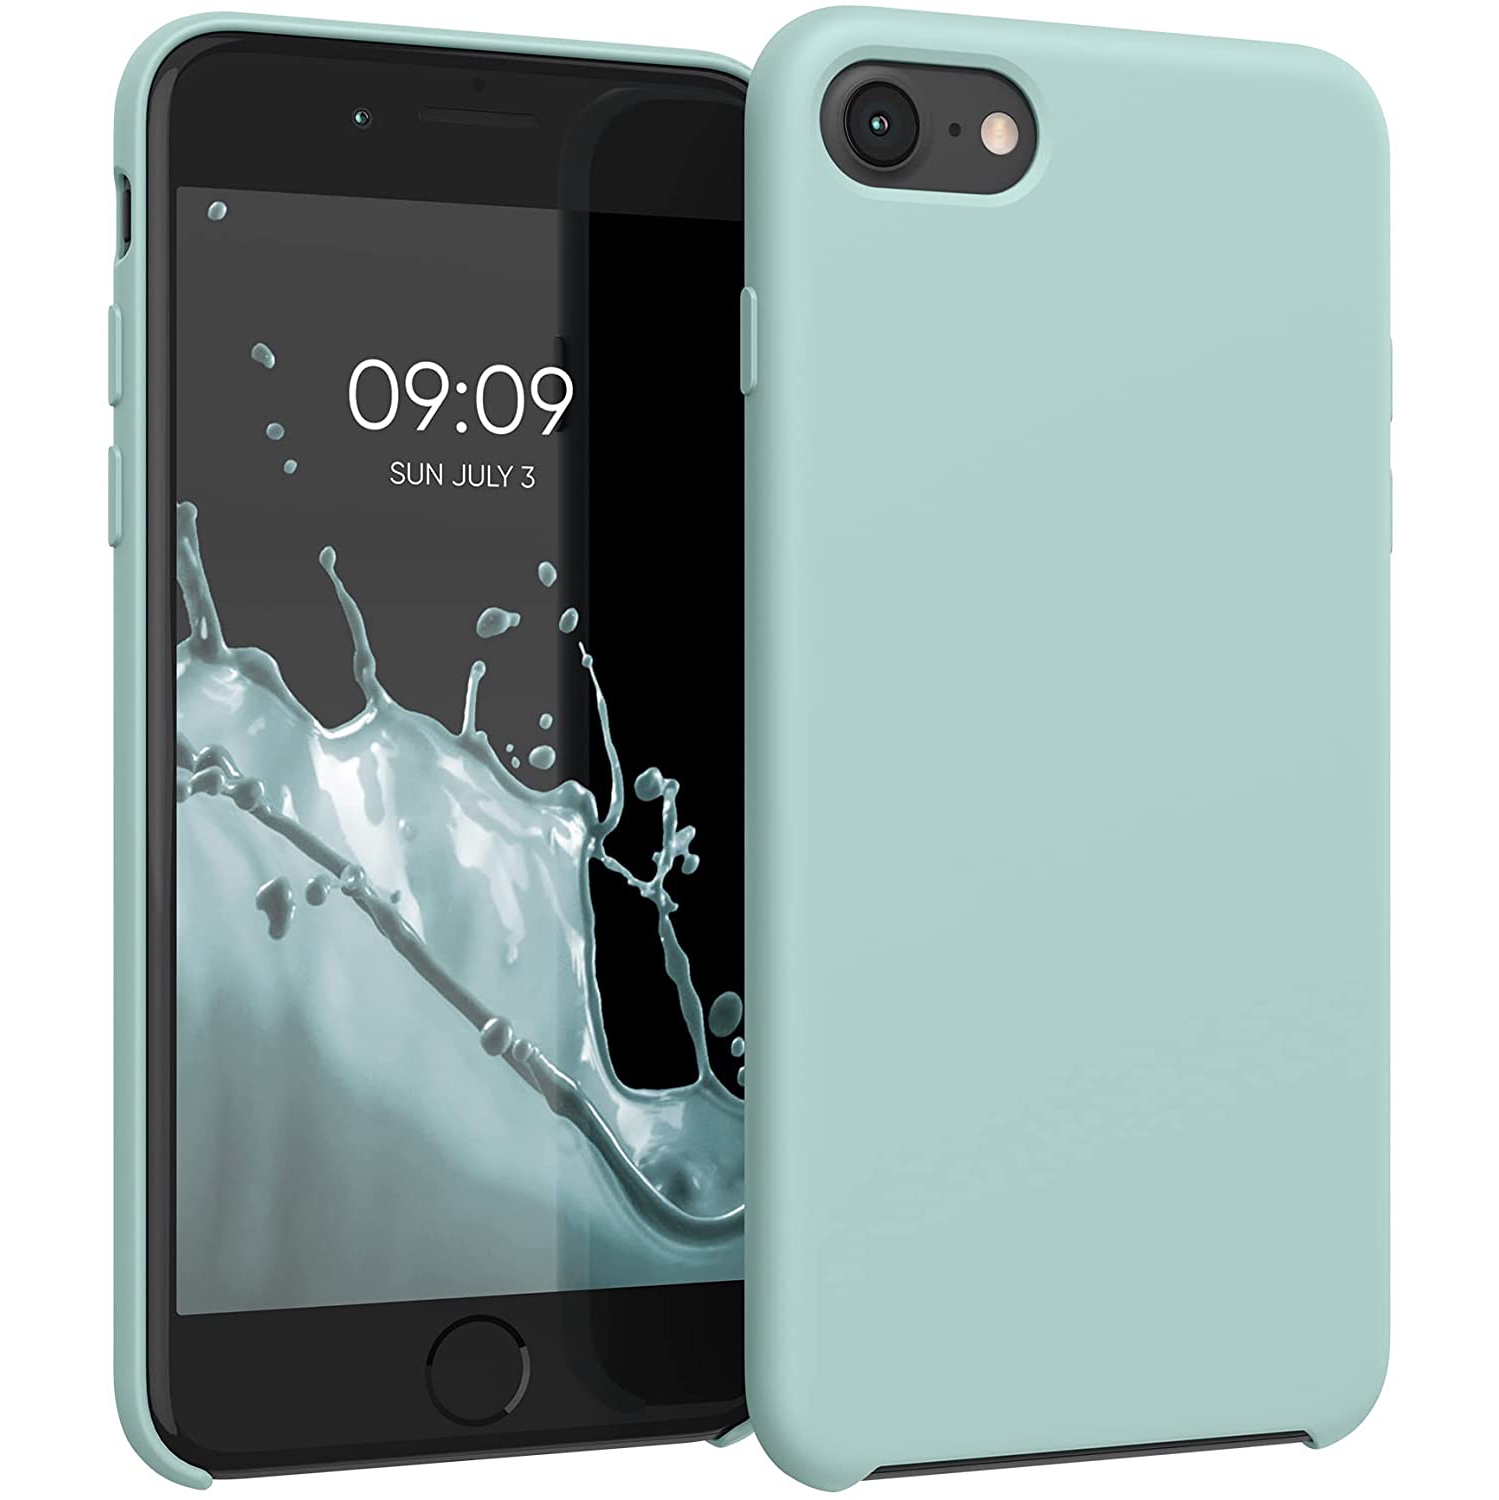 TPU Silicone Case Compatible with Apple iPhone 7/8 / SE (2020) - Case Slim Phone Cover with Soft Finish - Mint